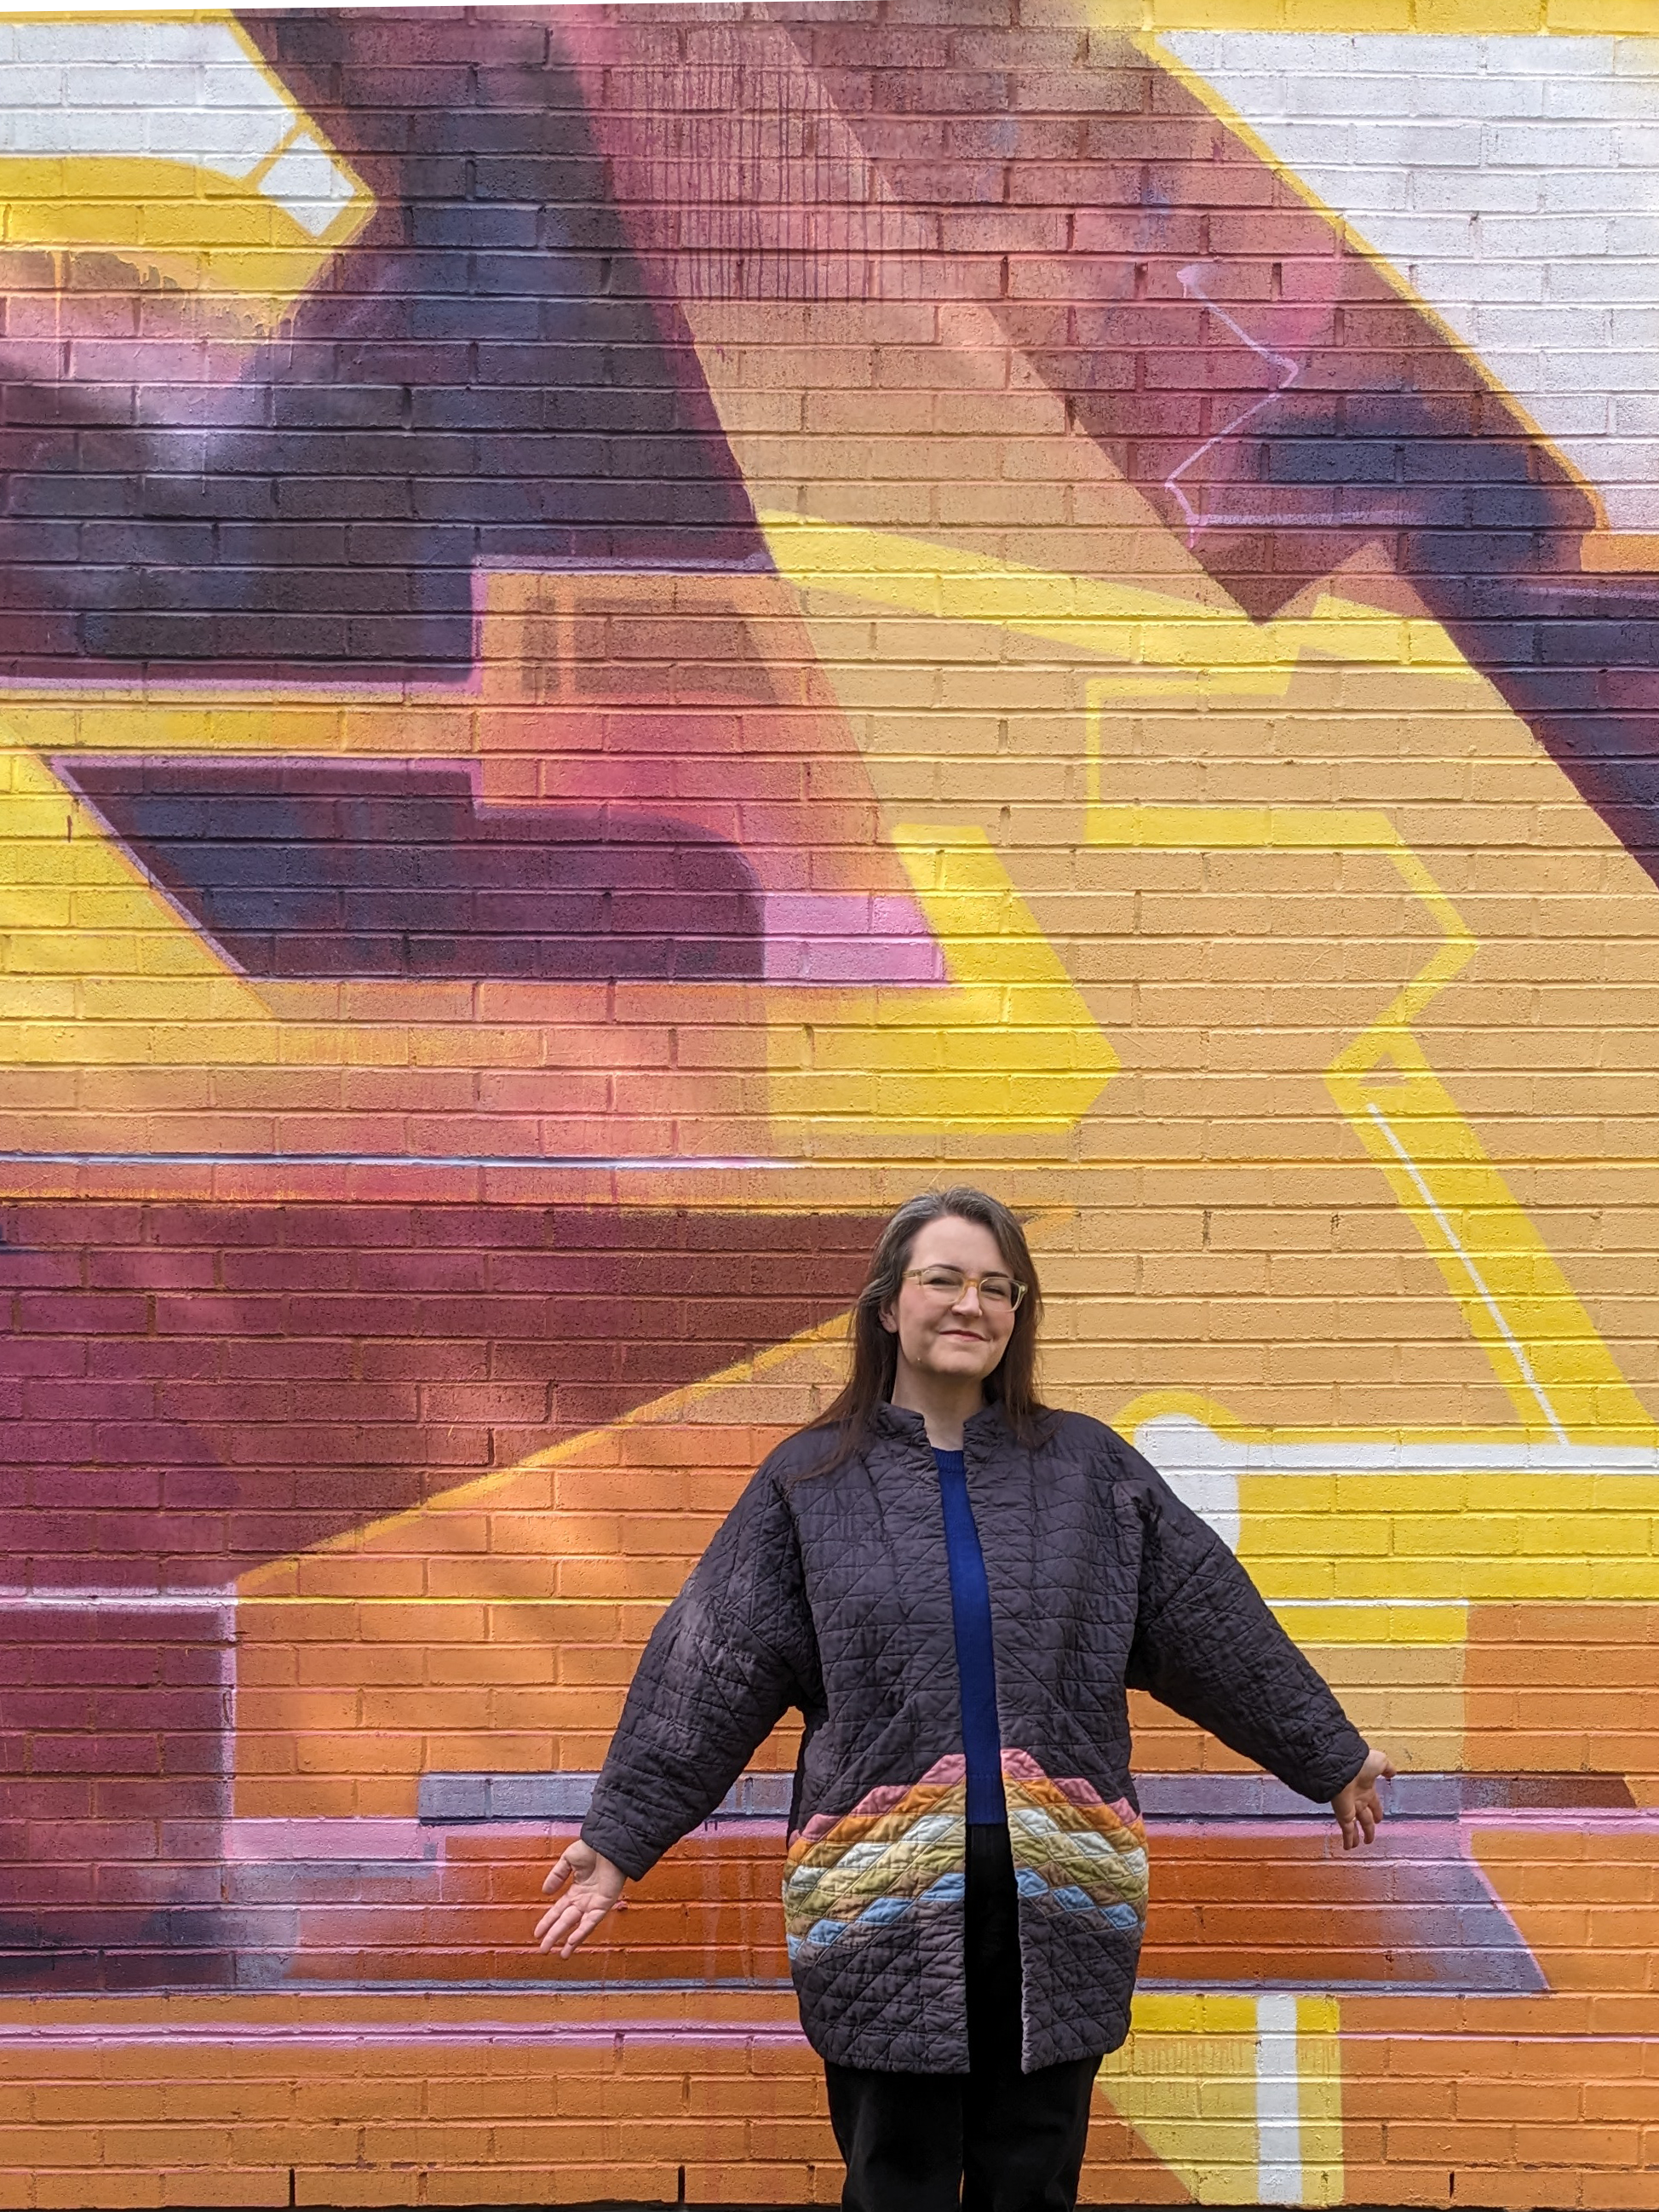 Me standing against a mural in my quilted rainbow coat smiling